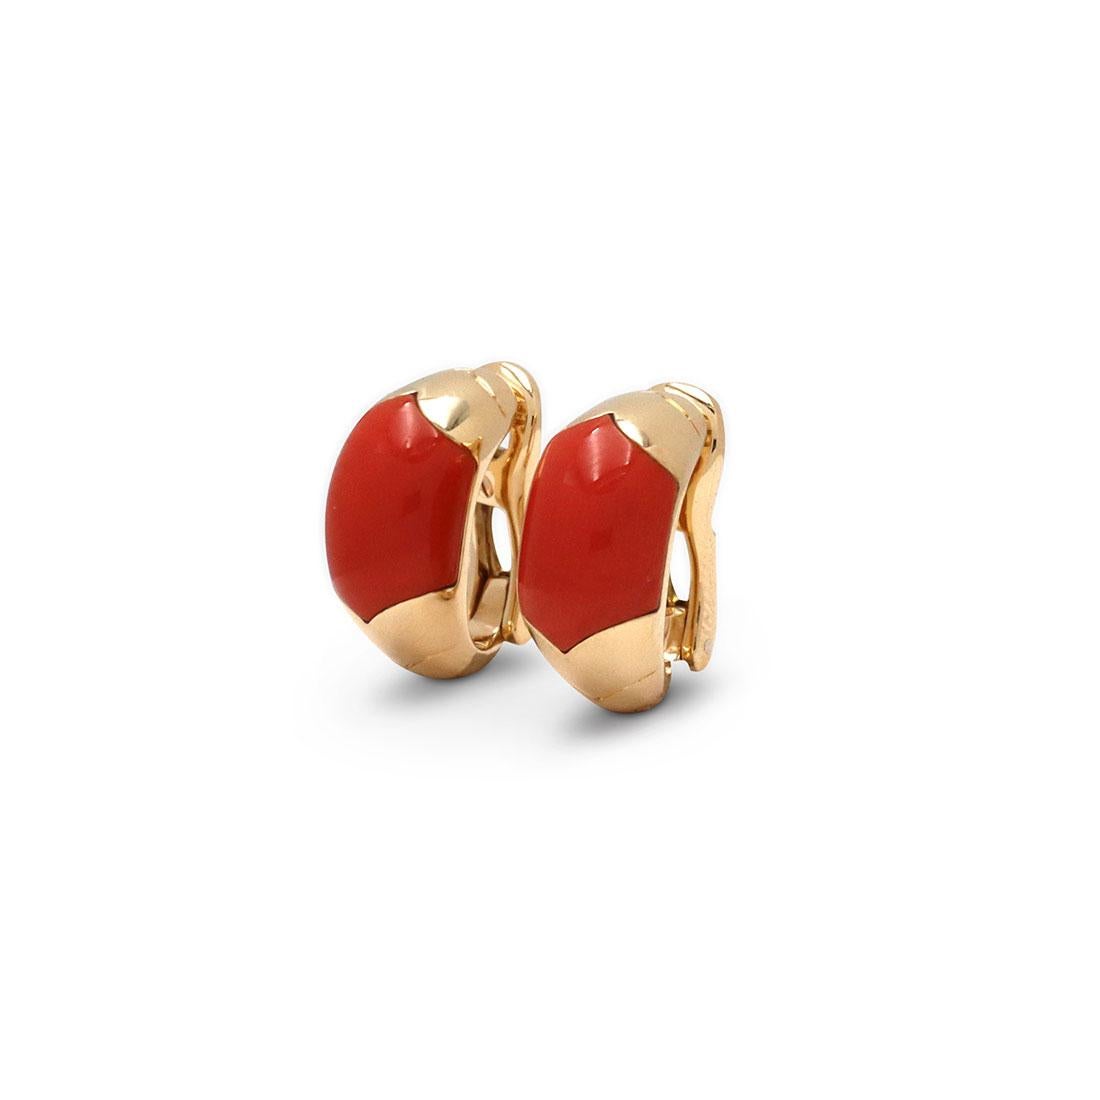 Authentic vintage Bvlgari 'Tronchetto' earrings crafted 18 karat yellow gold. The earrings are set with coral and feature clip back closures that can be converted to posts. The earrings measure 19.5mm in length and 9.5mm in width. Signed, Bvlgari,